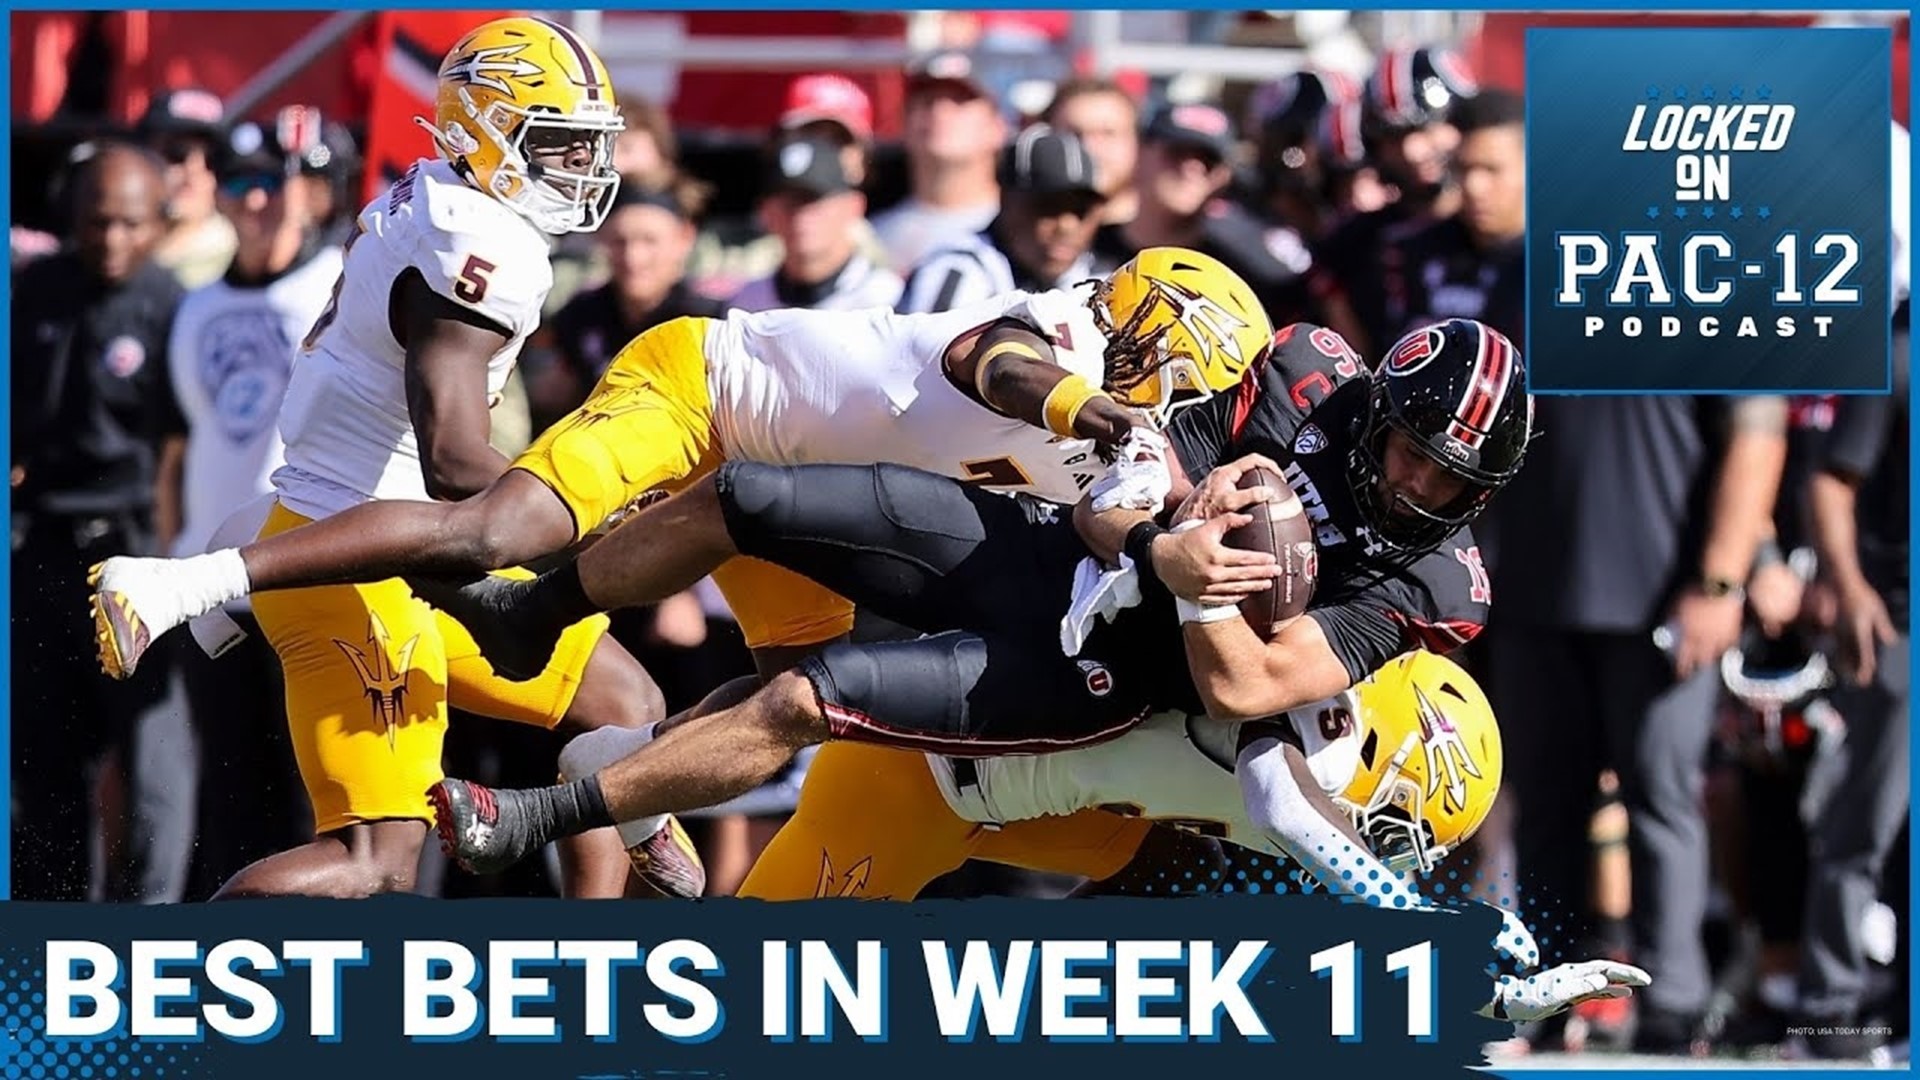 Spencer McLaughlin gives out his best bets for the week after consecutive winning weeks on the 'Pac-12 Prime Picks'.